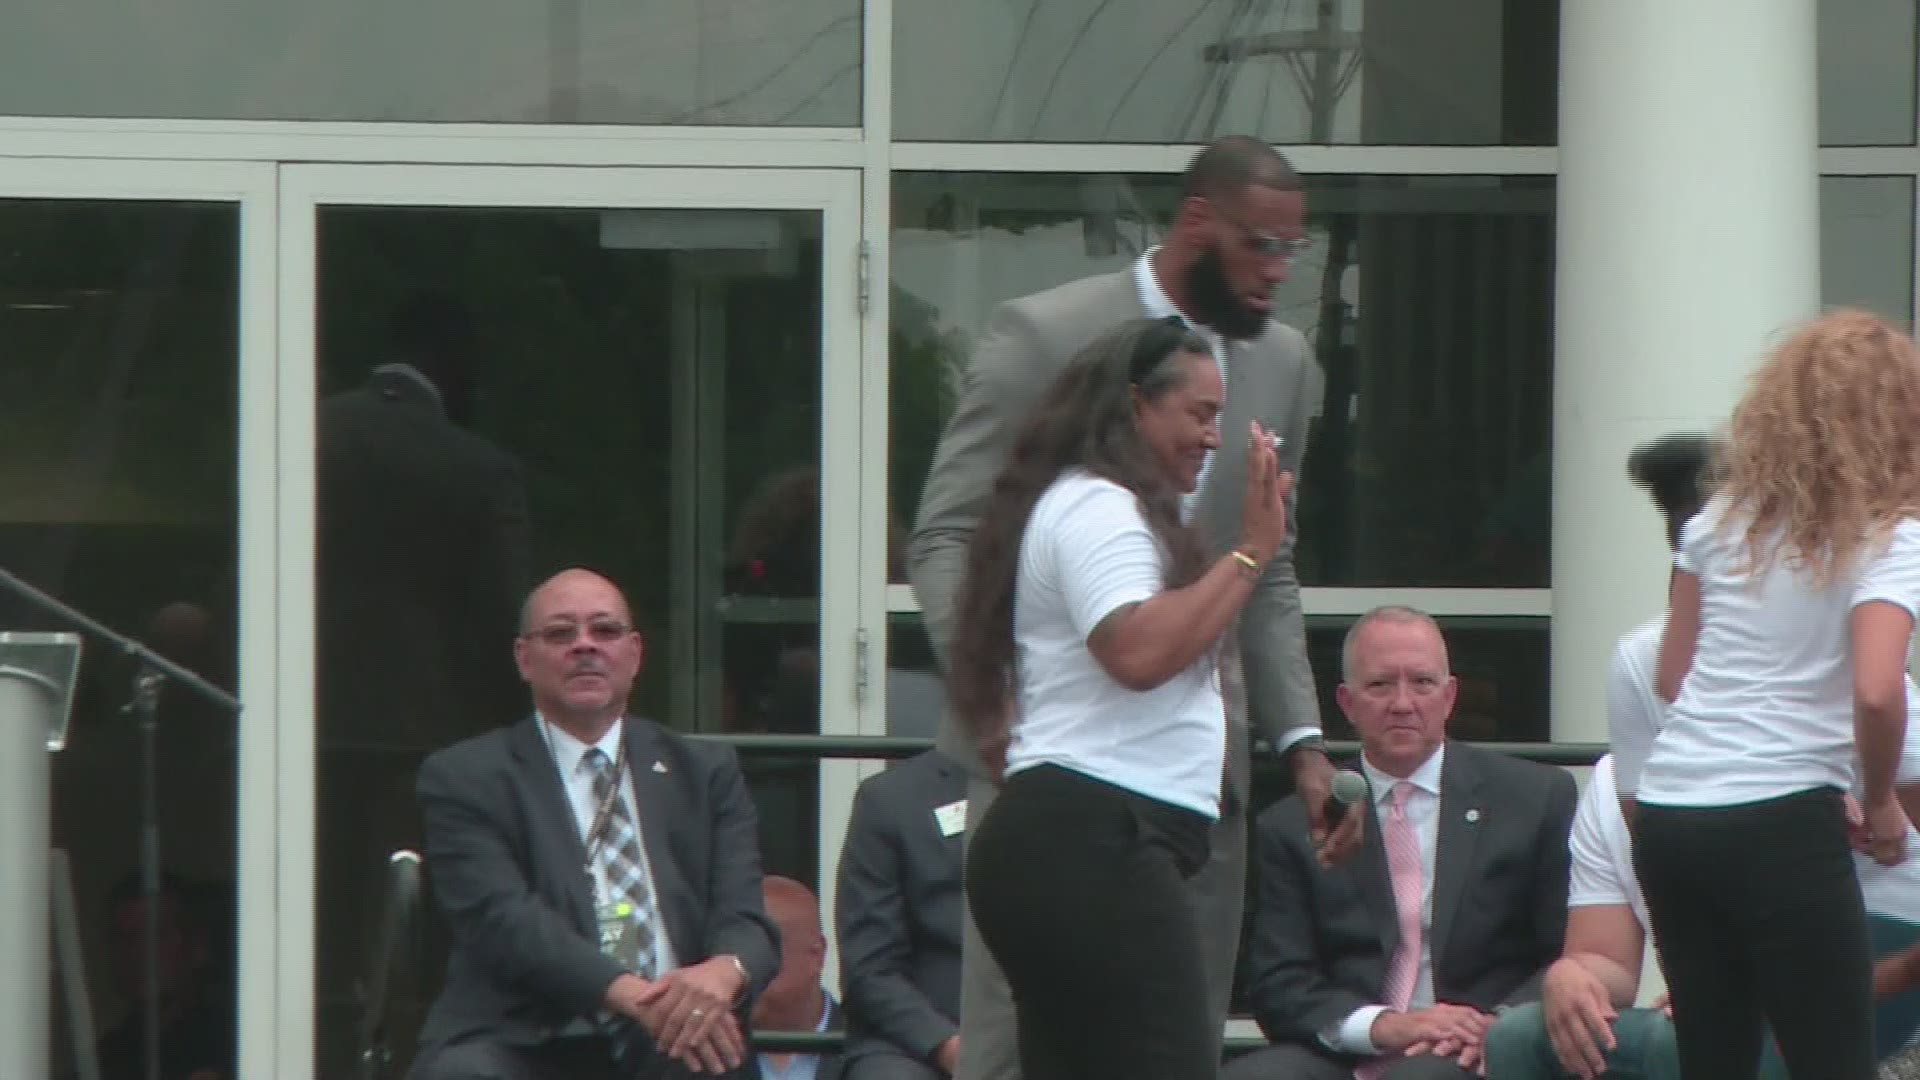 LeBron James speaks at opening of I PROMISE School in Akron